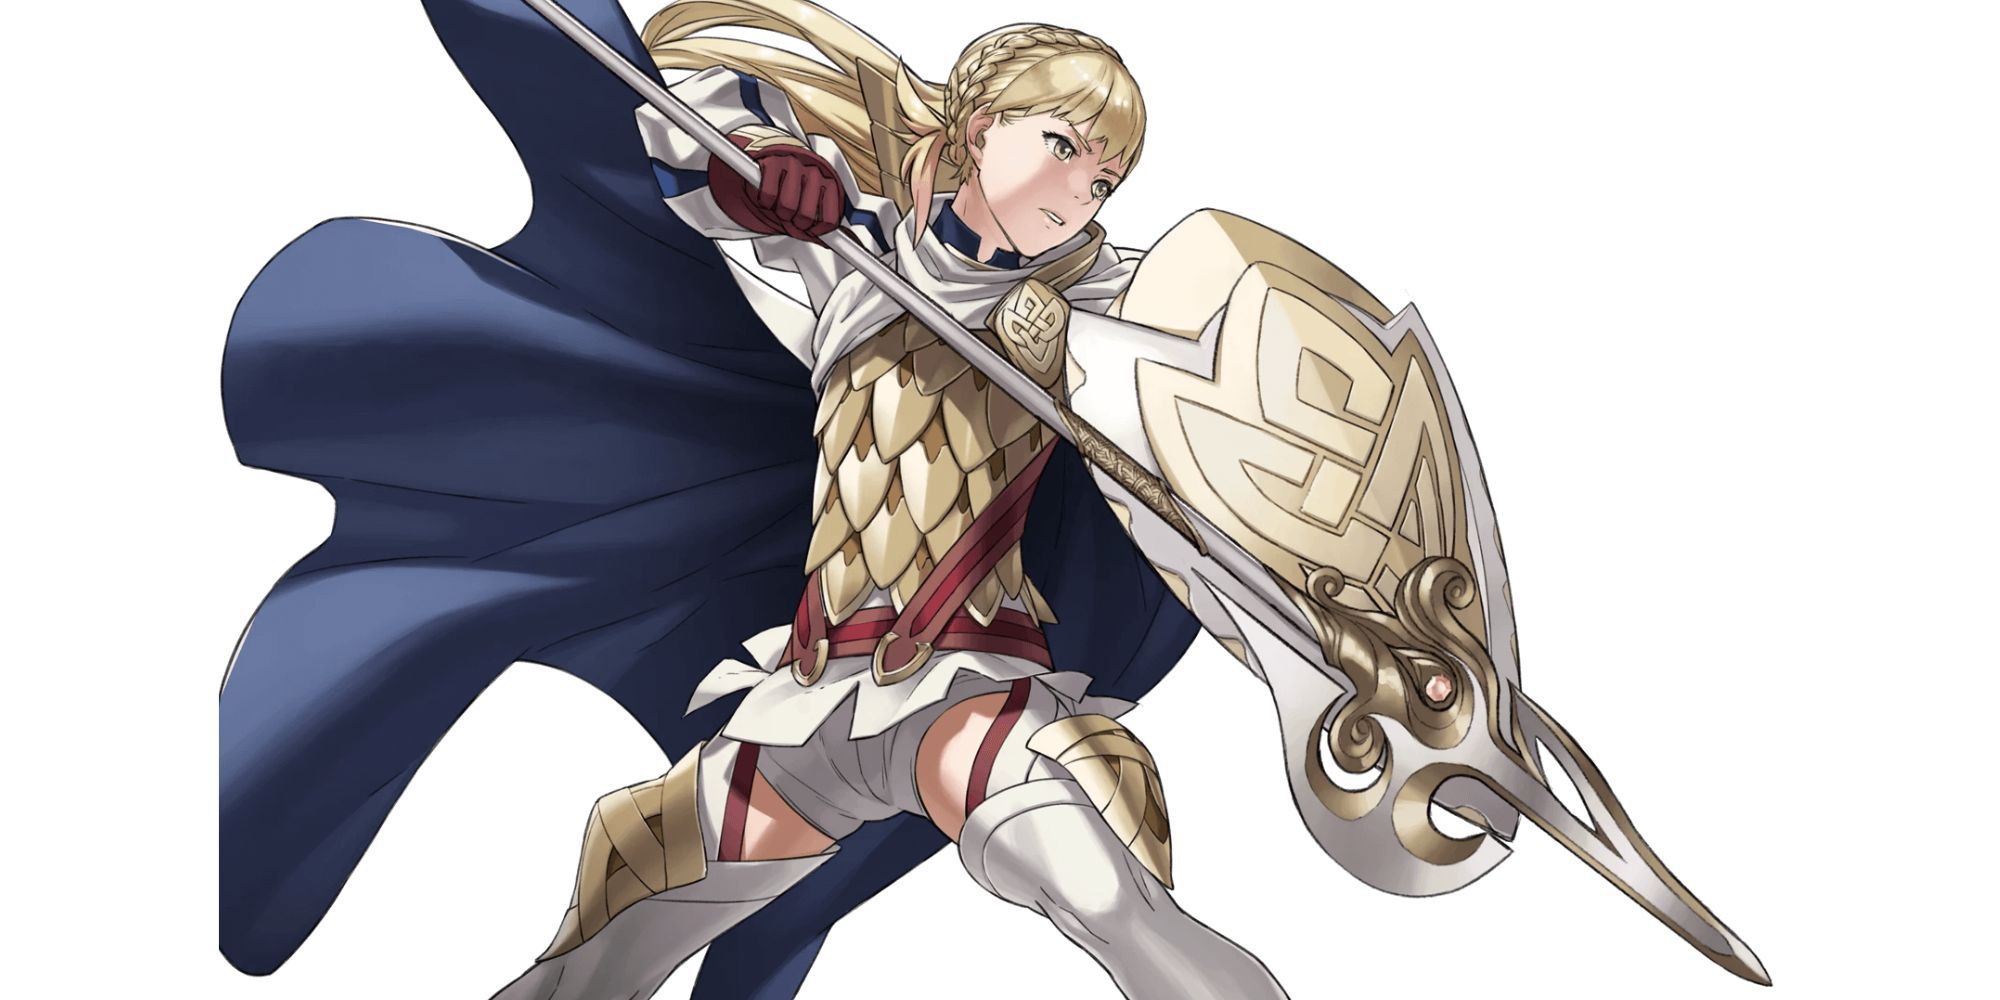 Sharena from Fire Emblem Heroes